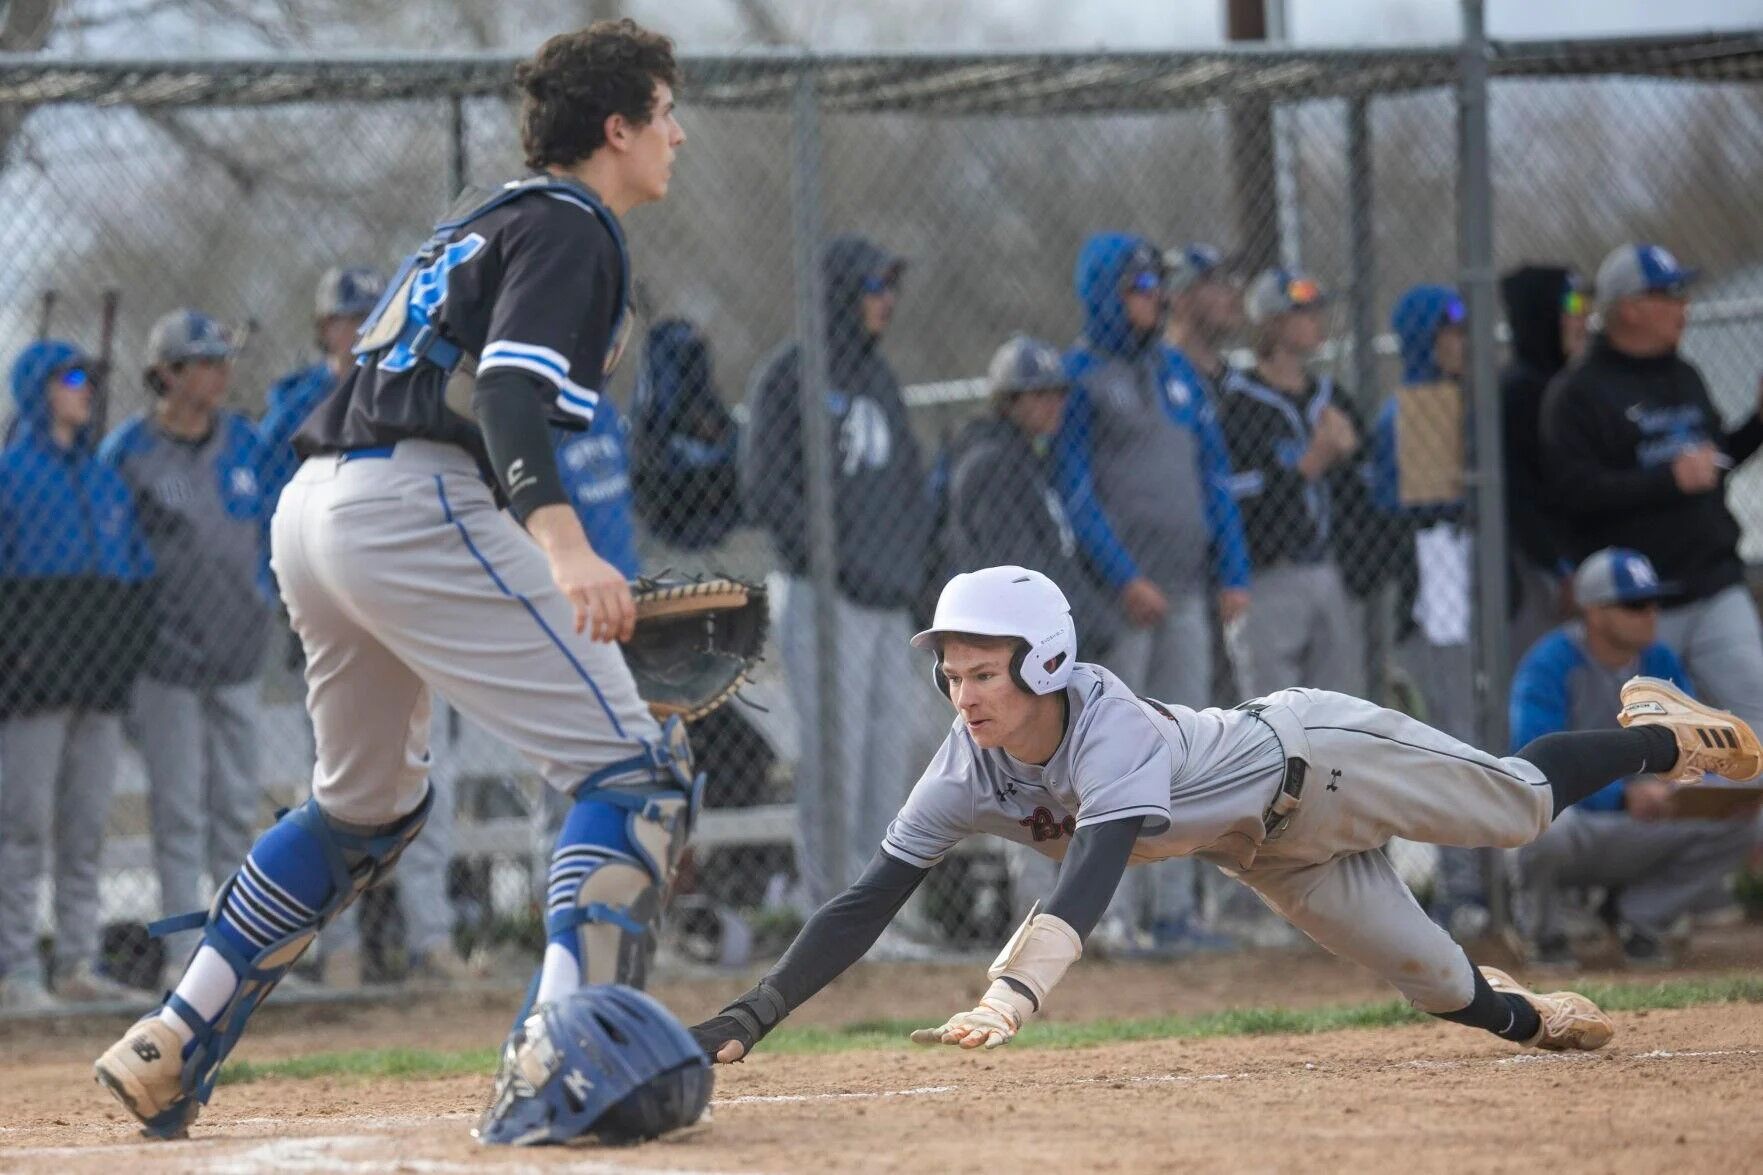 Malcolm Beats Beatrice in High-Scoring Slugfest: 27 Runs and 9 Home Runs in Windy Game